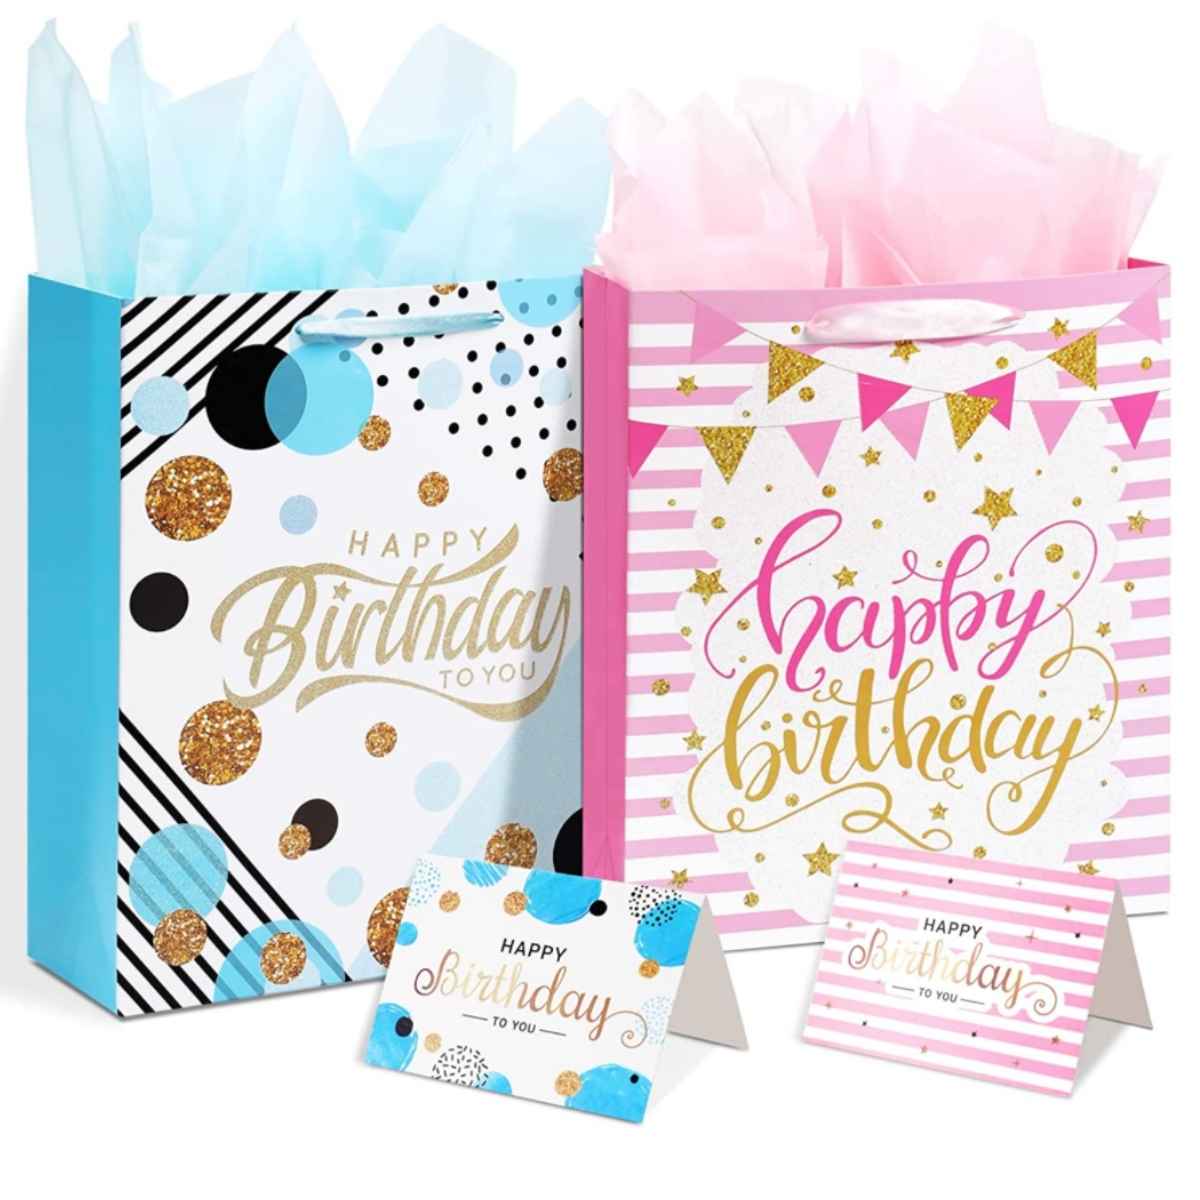 Two largesized birthday gift bags for 3 (Reg. 7